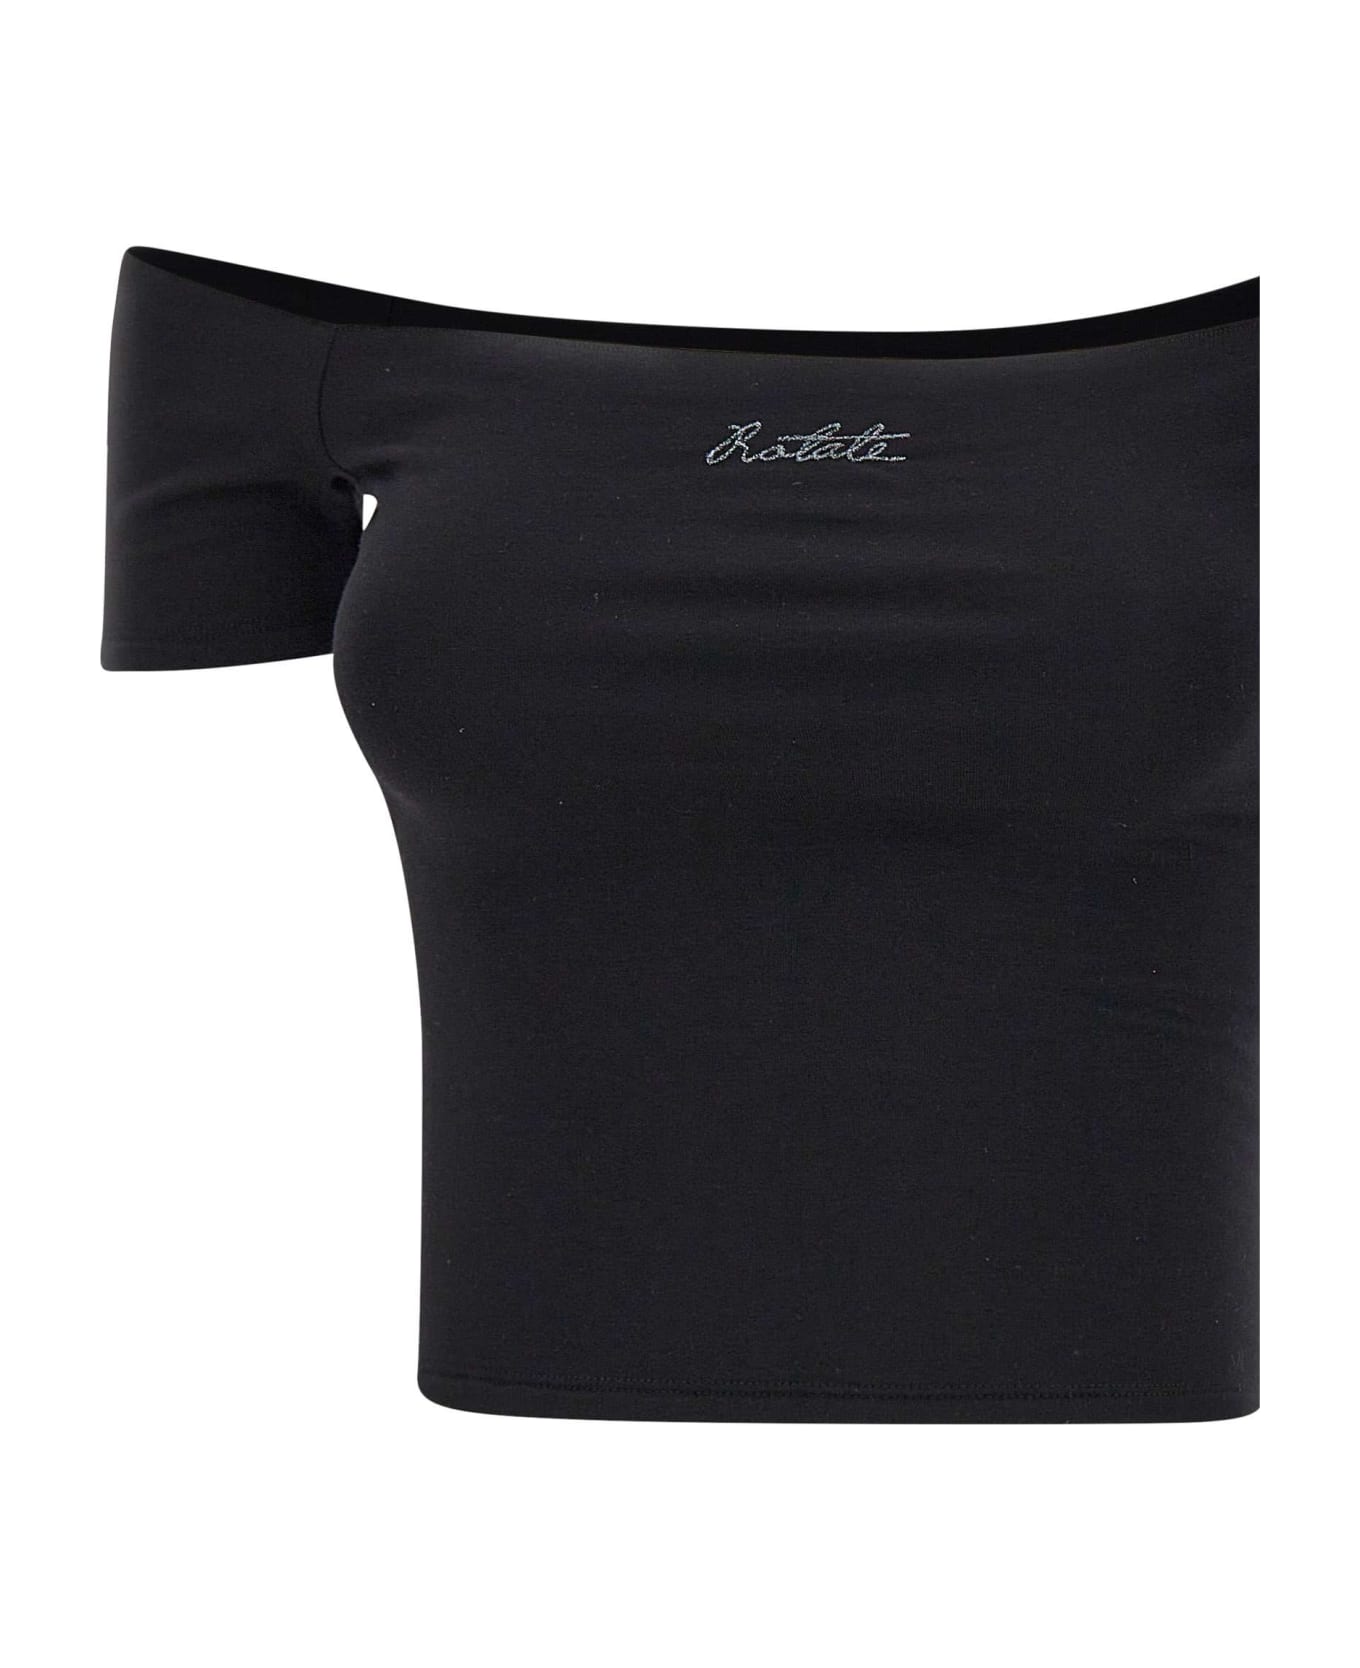 Rotate by Birger Christensen "logo Off" Cotton And Modal Top - BLACK